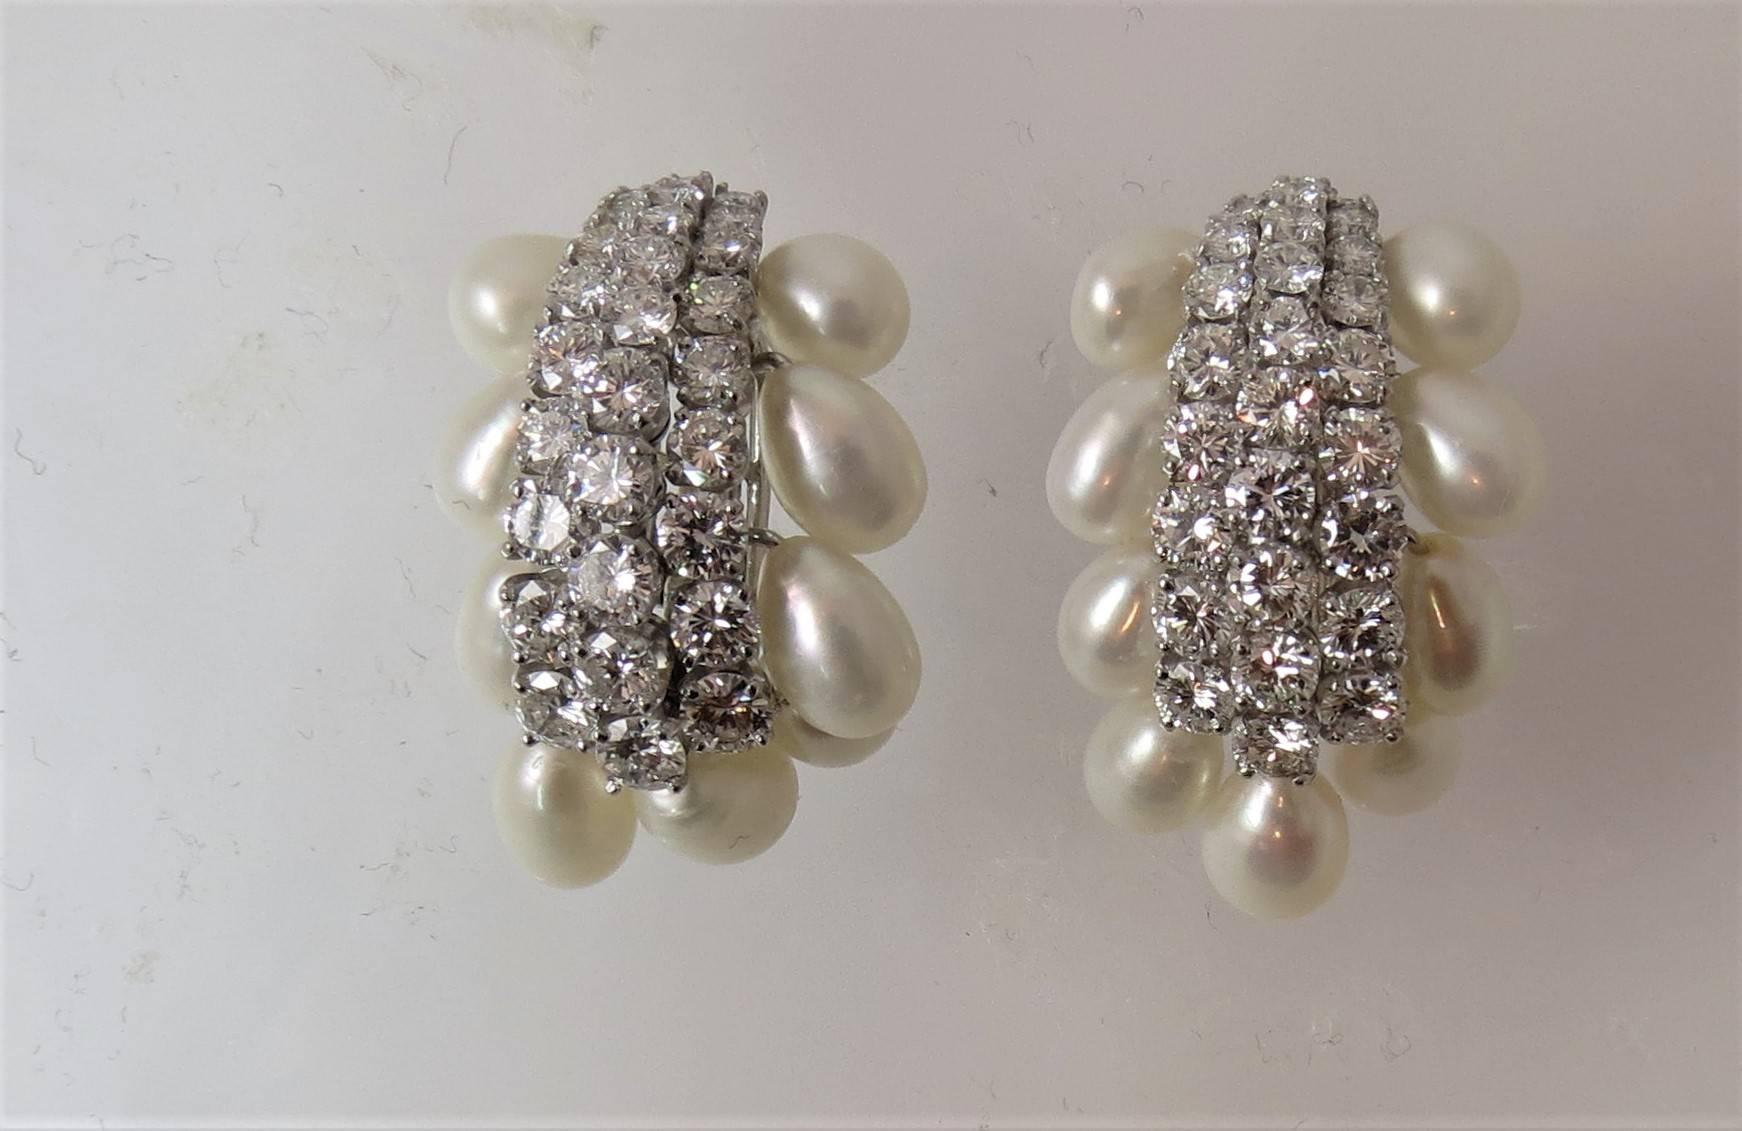 Stunning David Webb platinum and diamond pearl earrings, set with 18 Biwi cultured pearls, and 56 full cut round diamonds weighing approximately 5.50cts